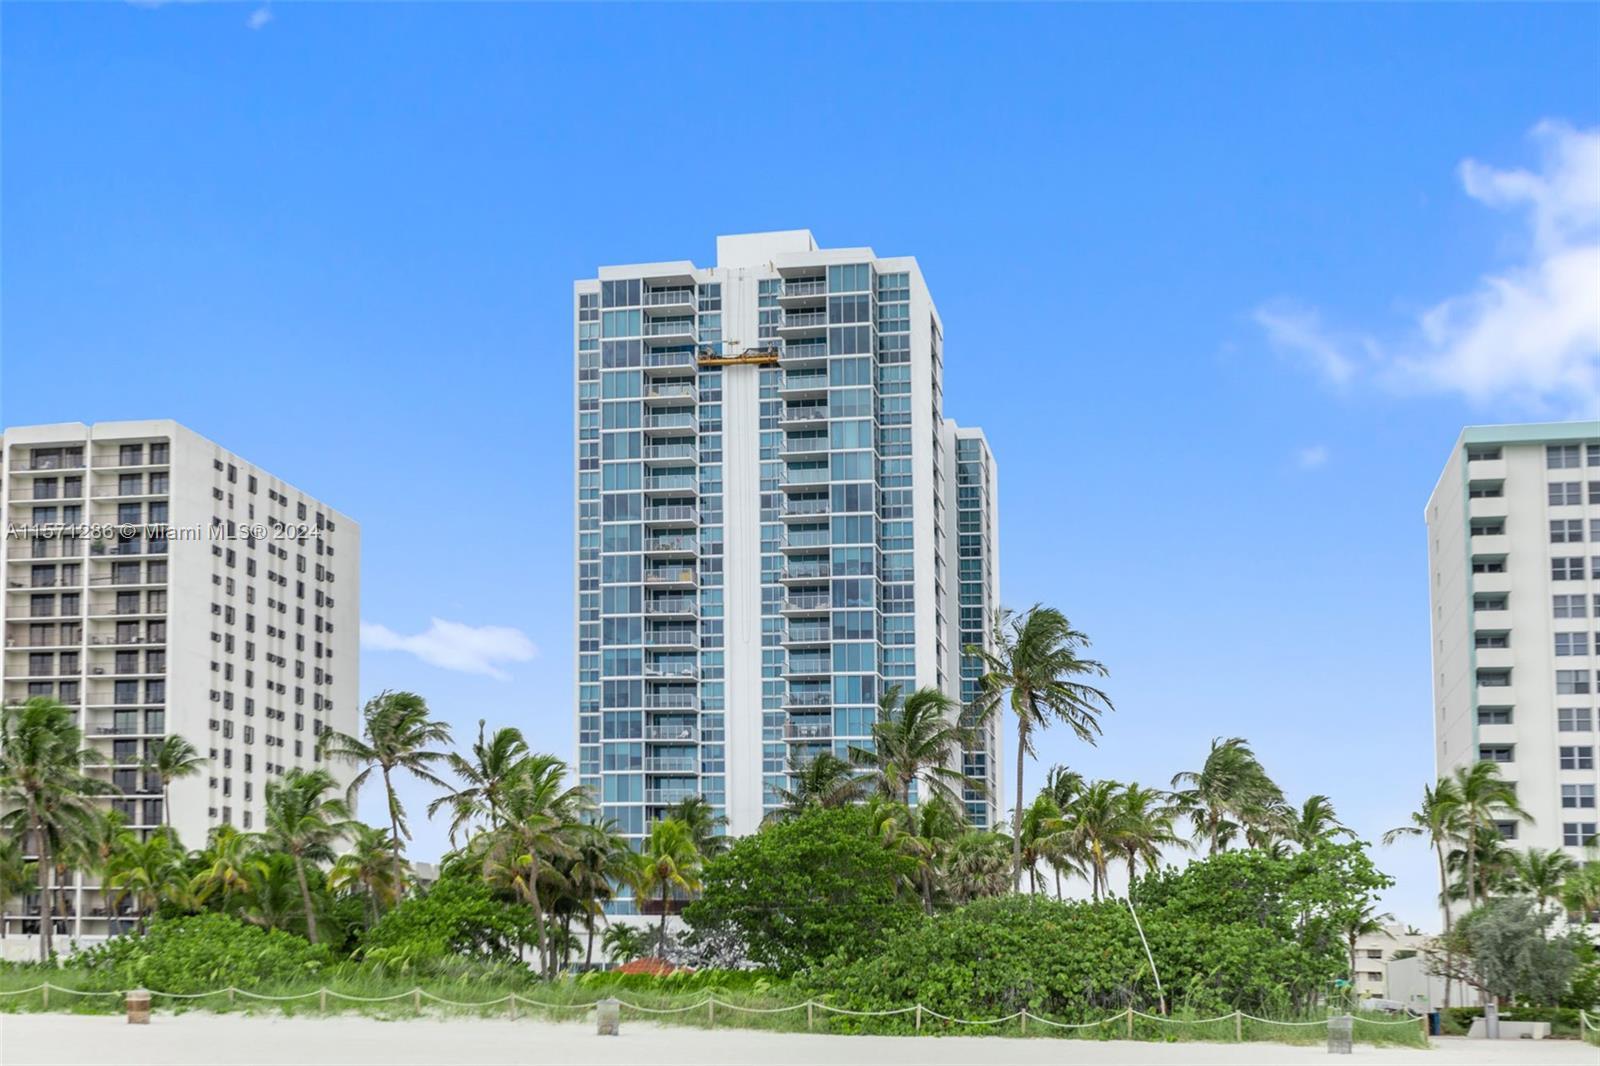 This is the best price for an oceanfront building, completing the gorgeous renovation. Fantastic upd